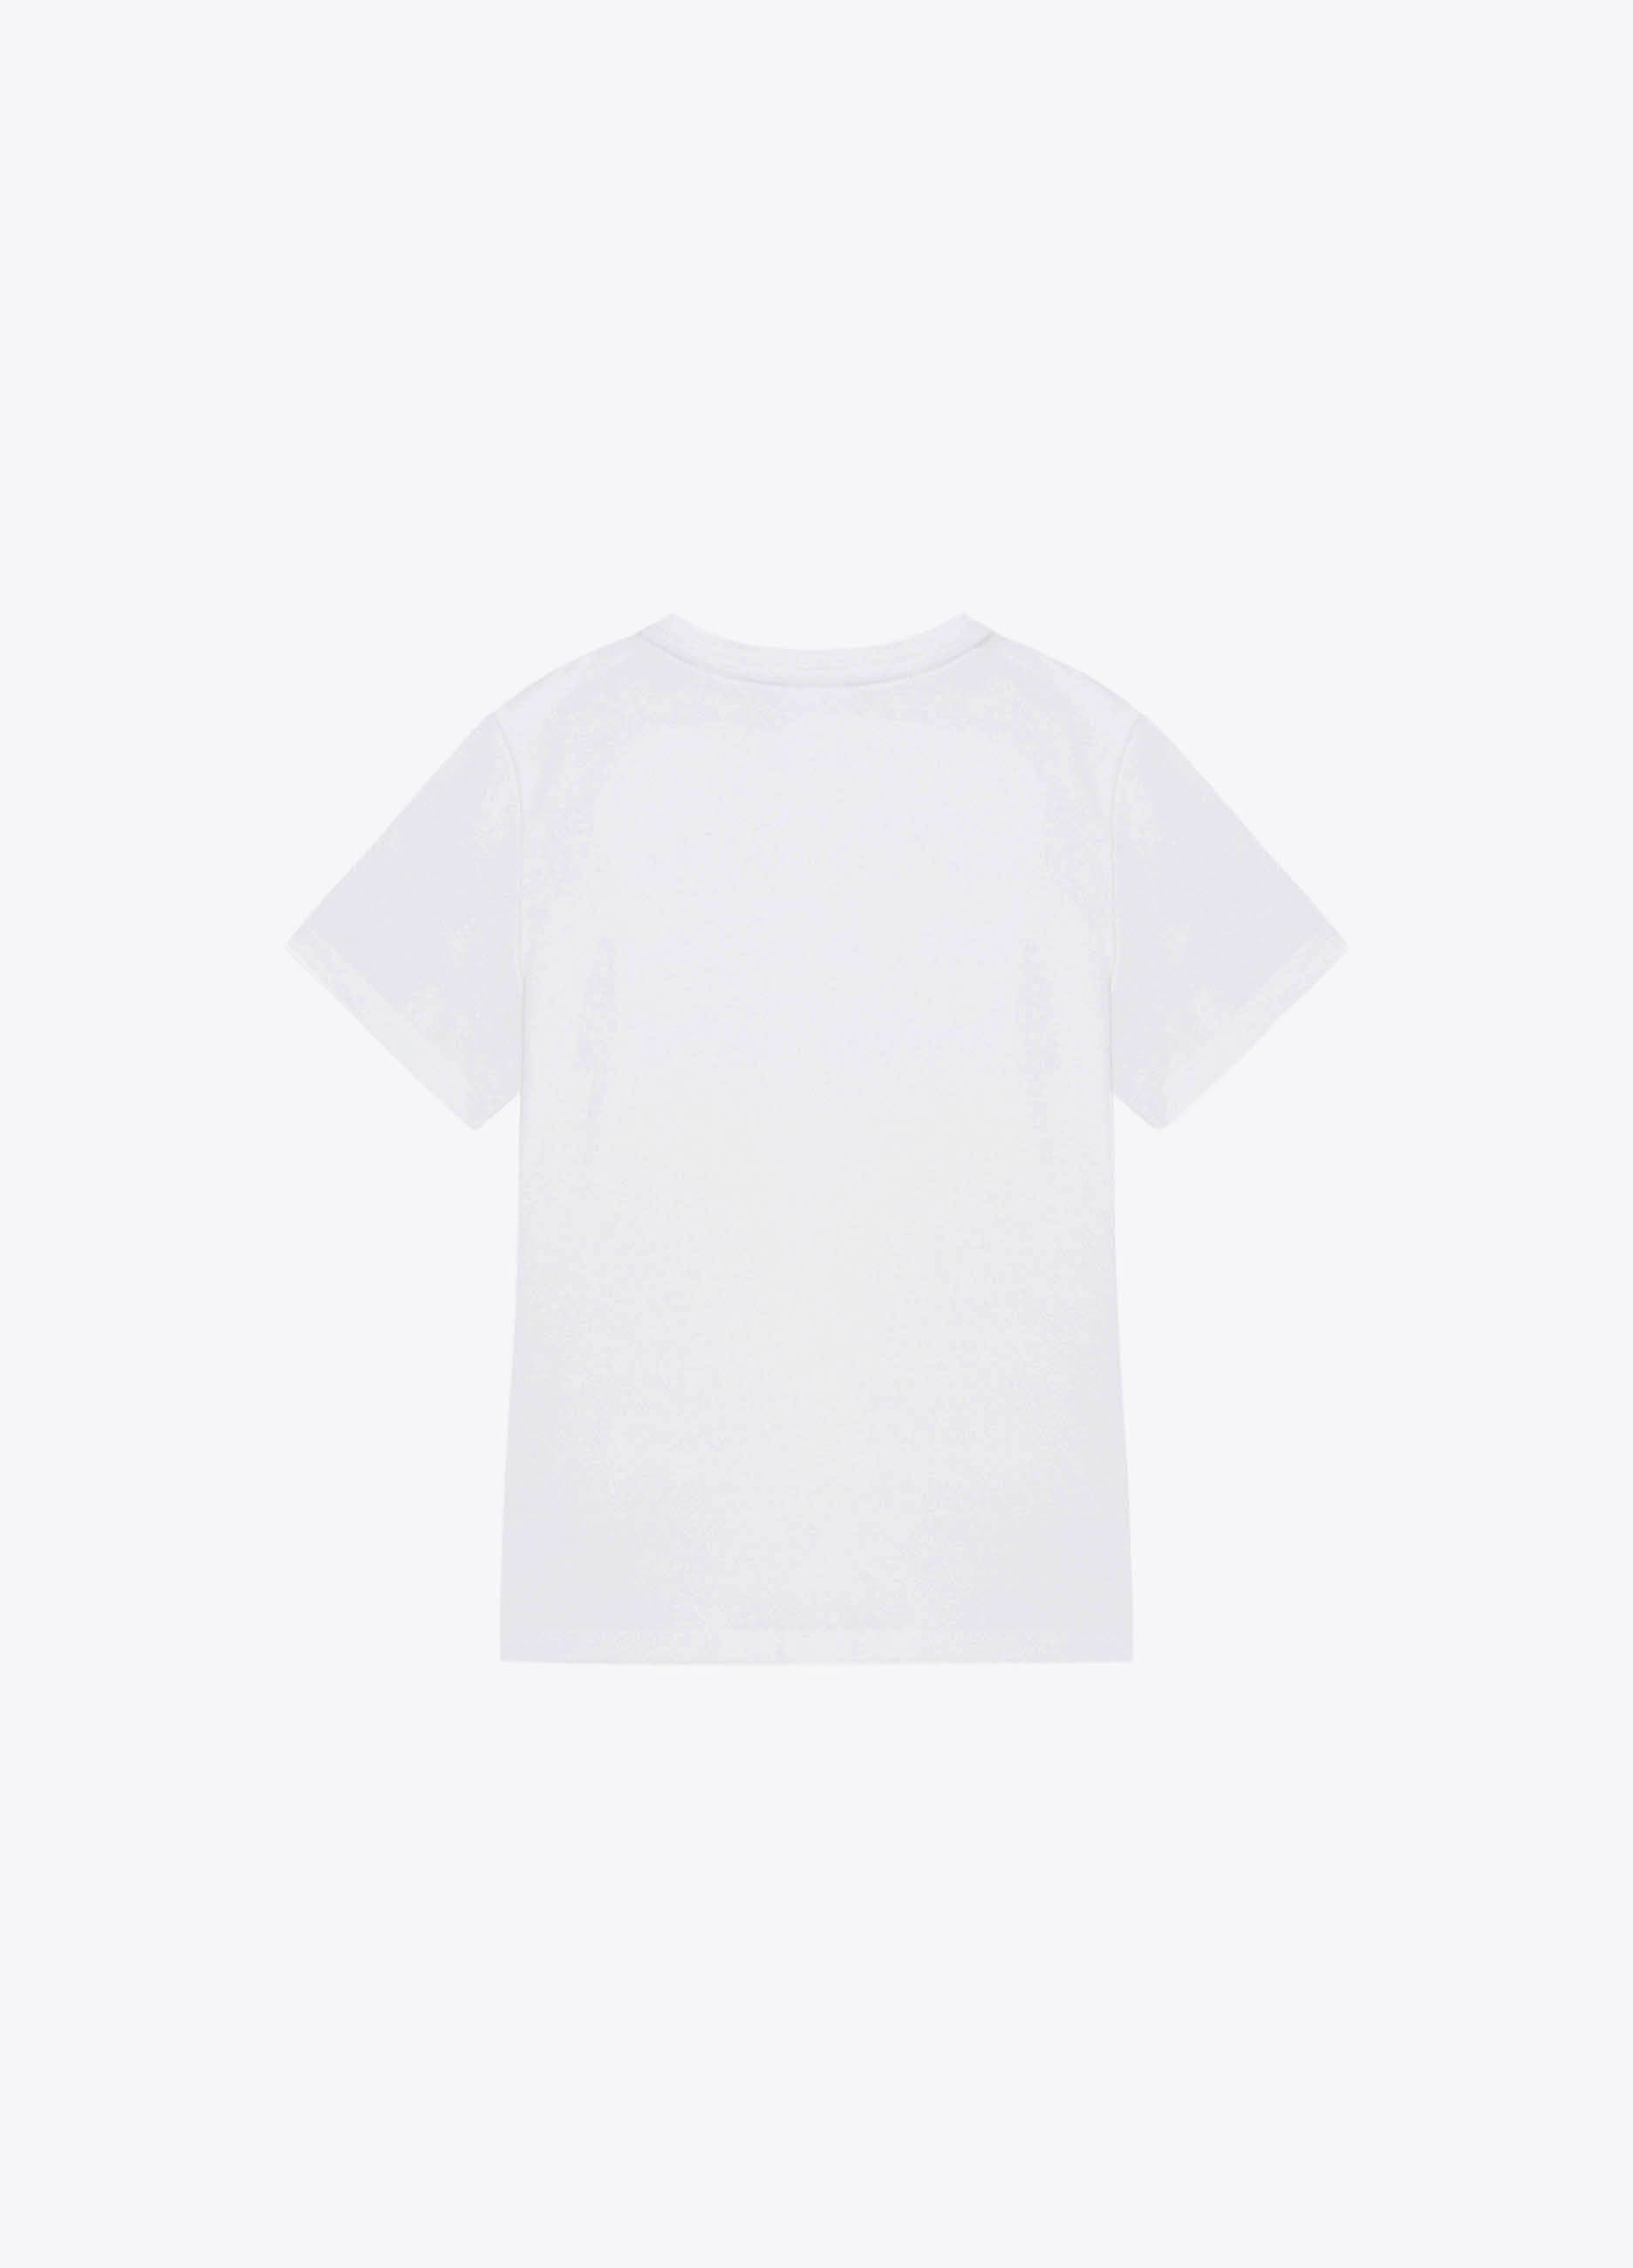 UNISEX - Short sleeves t-shirt with print.